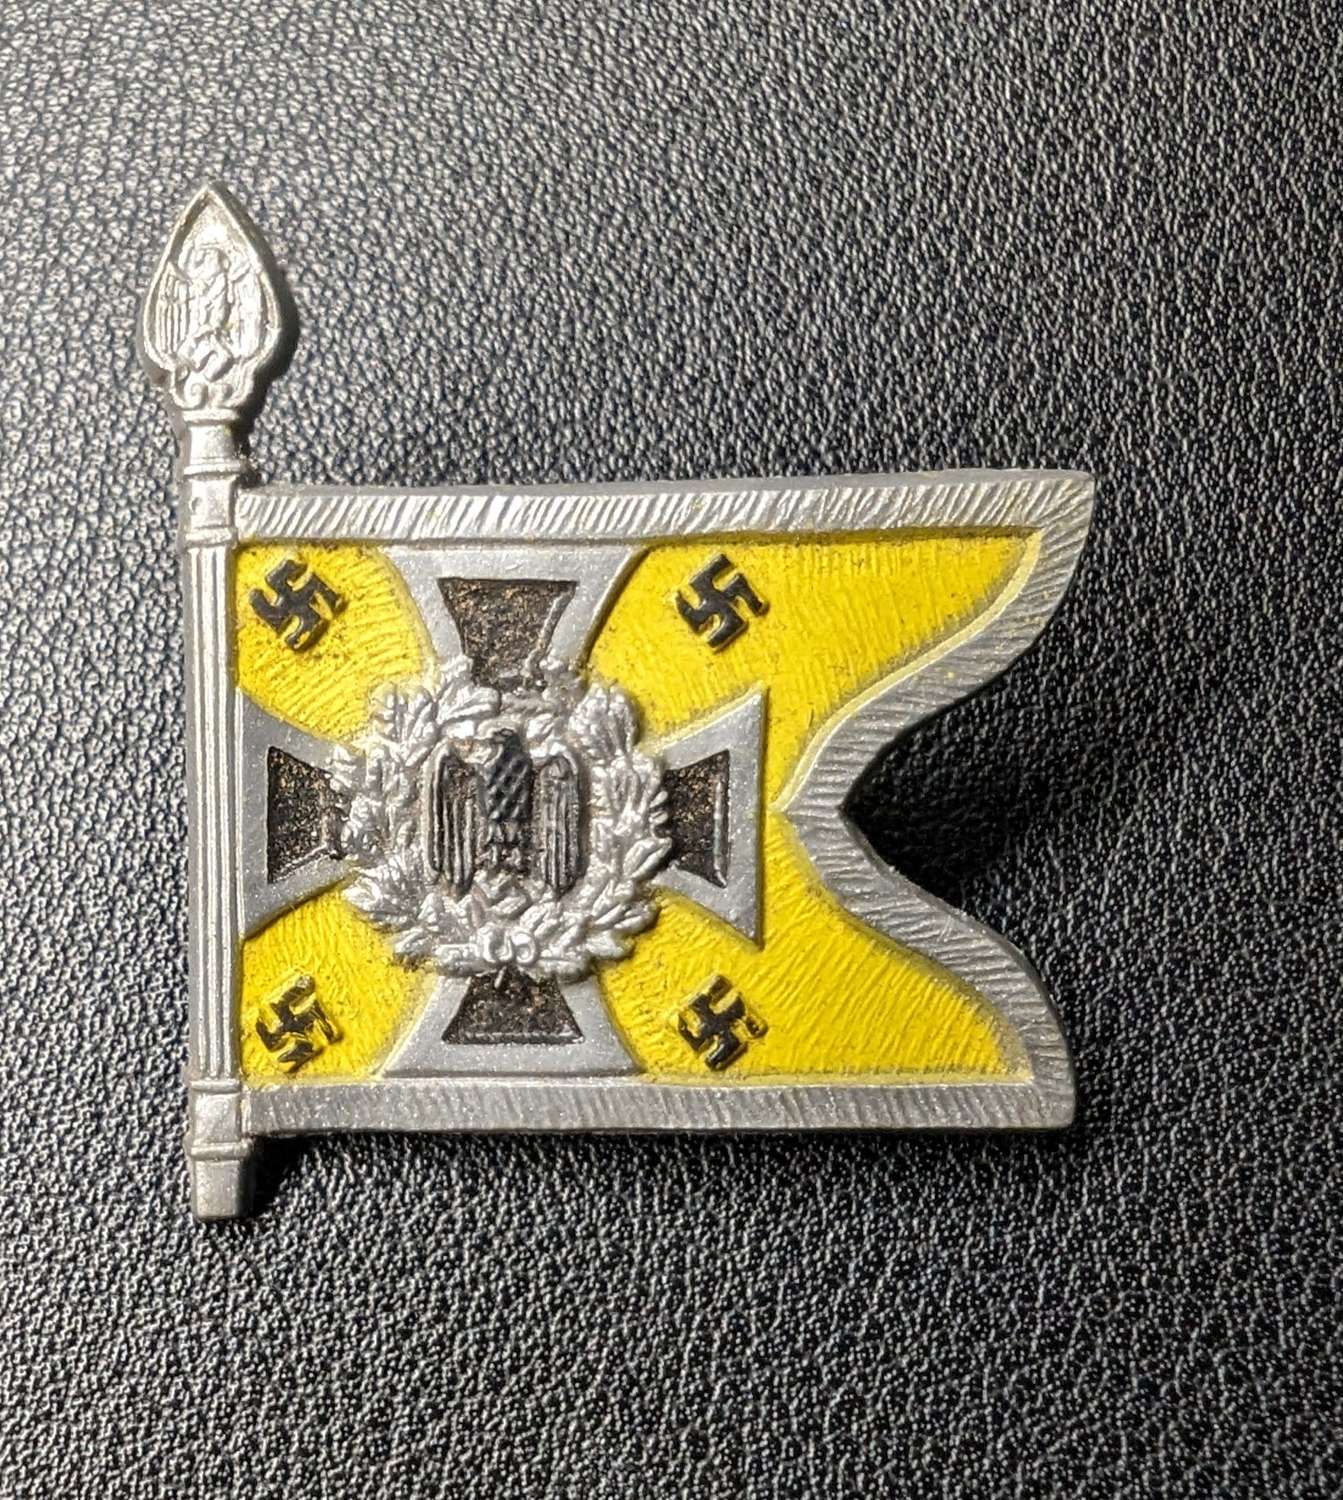 German Support pin for the Calvary Units